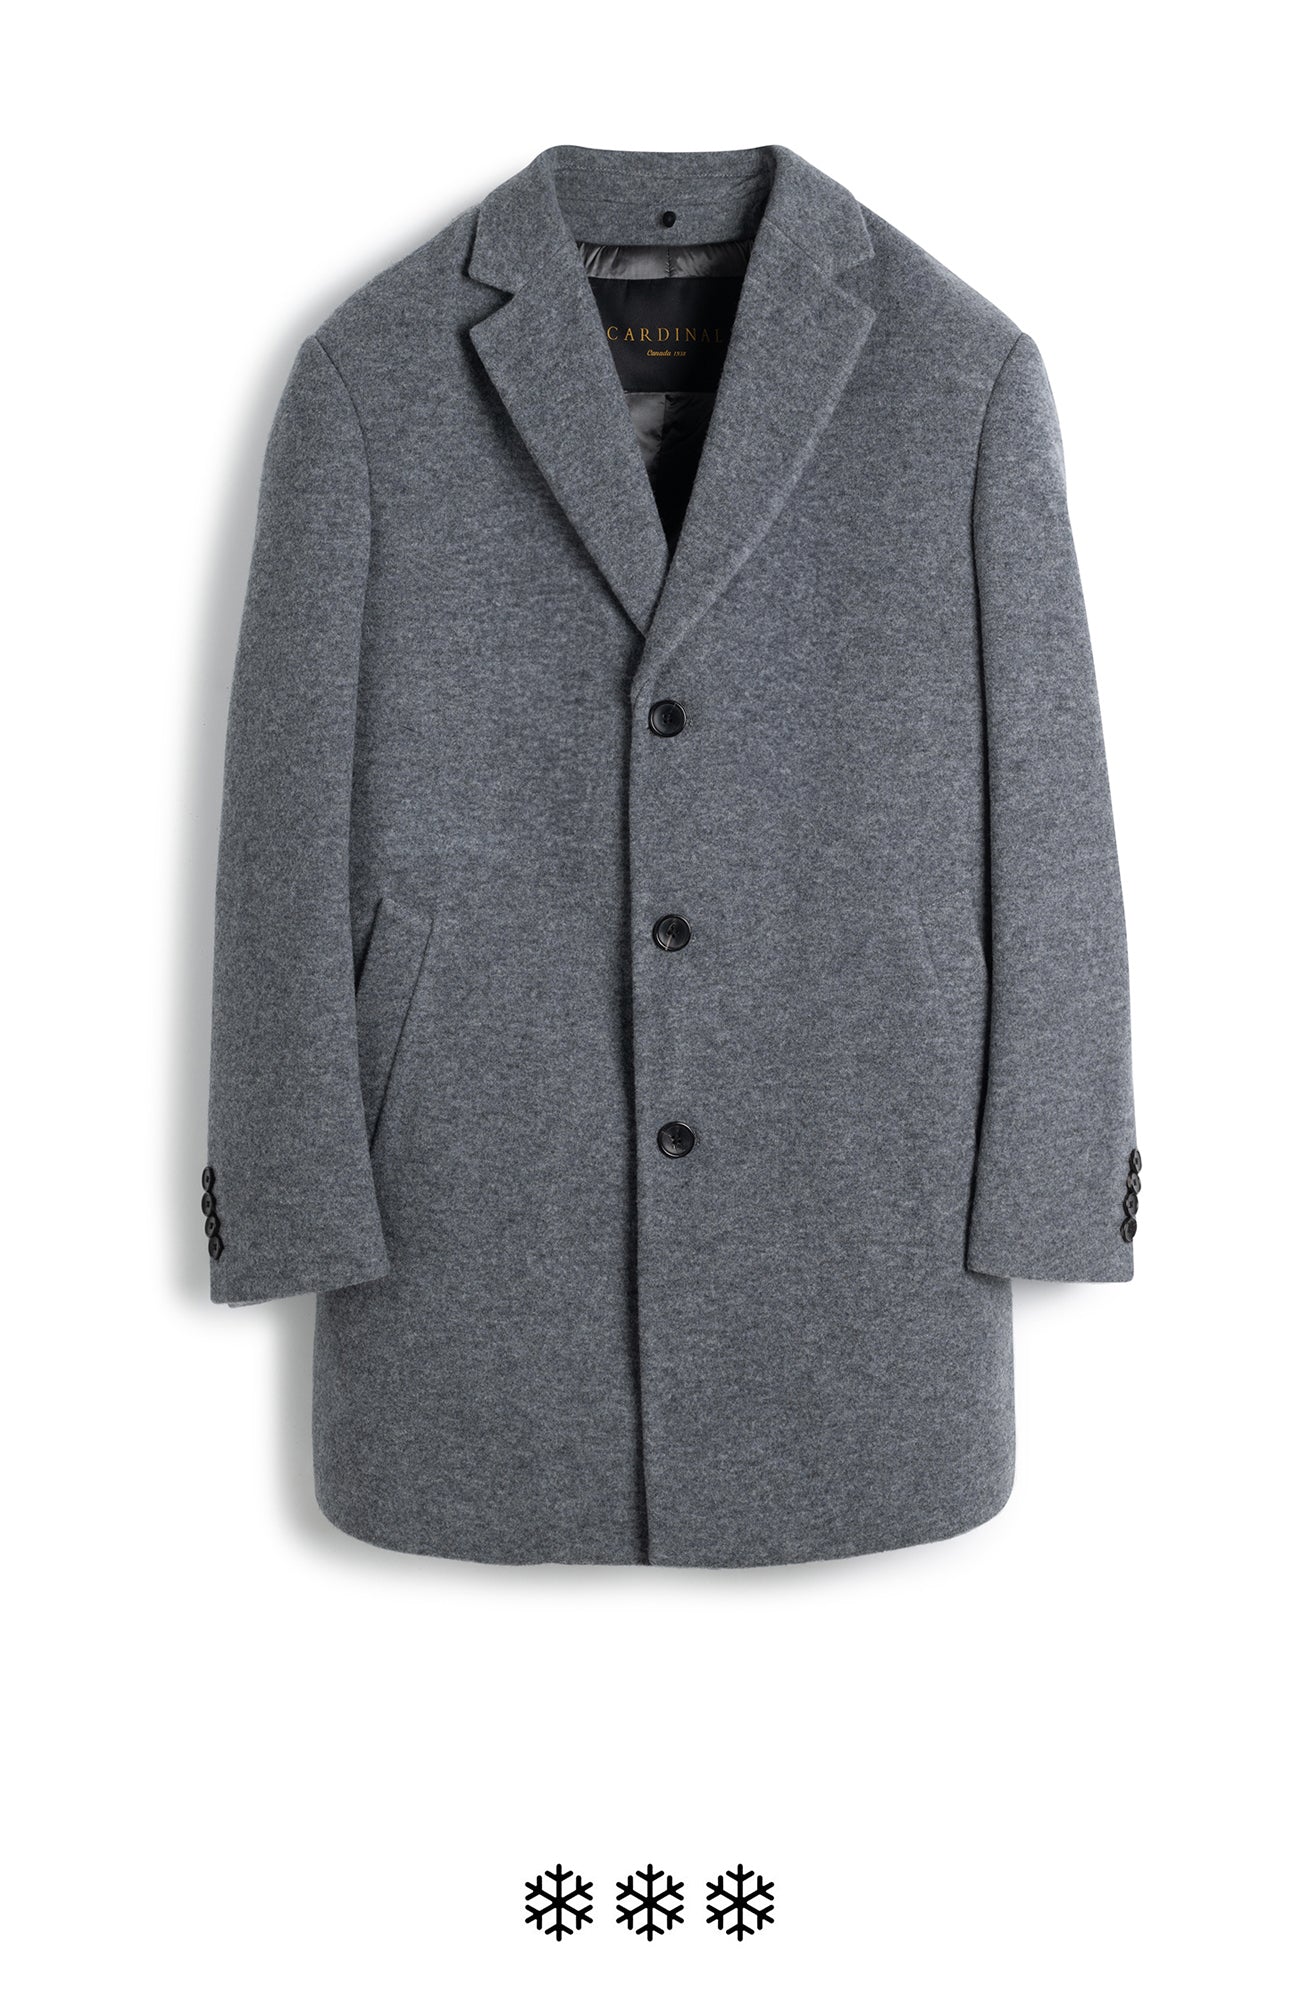 TYSON CHARCOAL TOPCOAT WITH PRIMALOFT INSULATION - MENS - Cardinal of Canada-CA - Tyson - charcoal wool topcoat 36 inch length